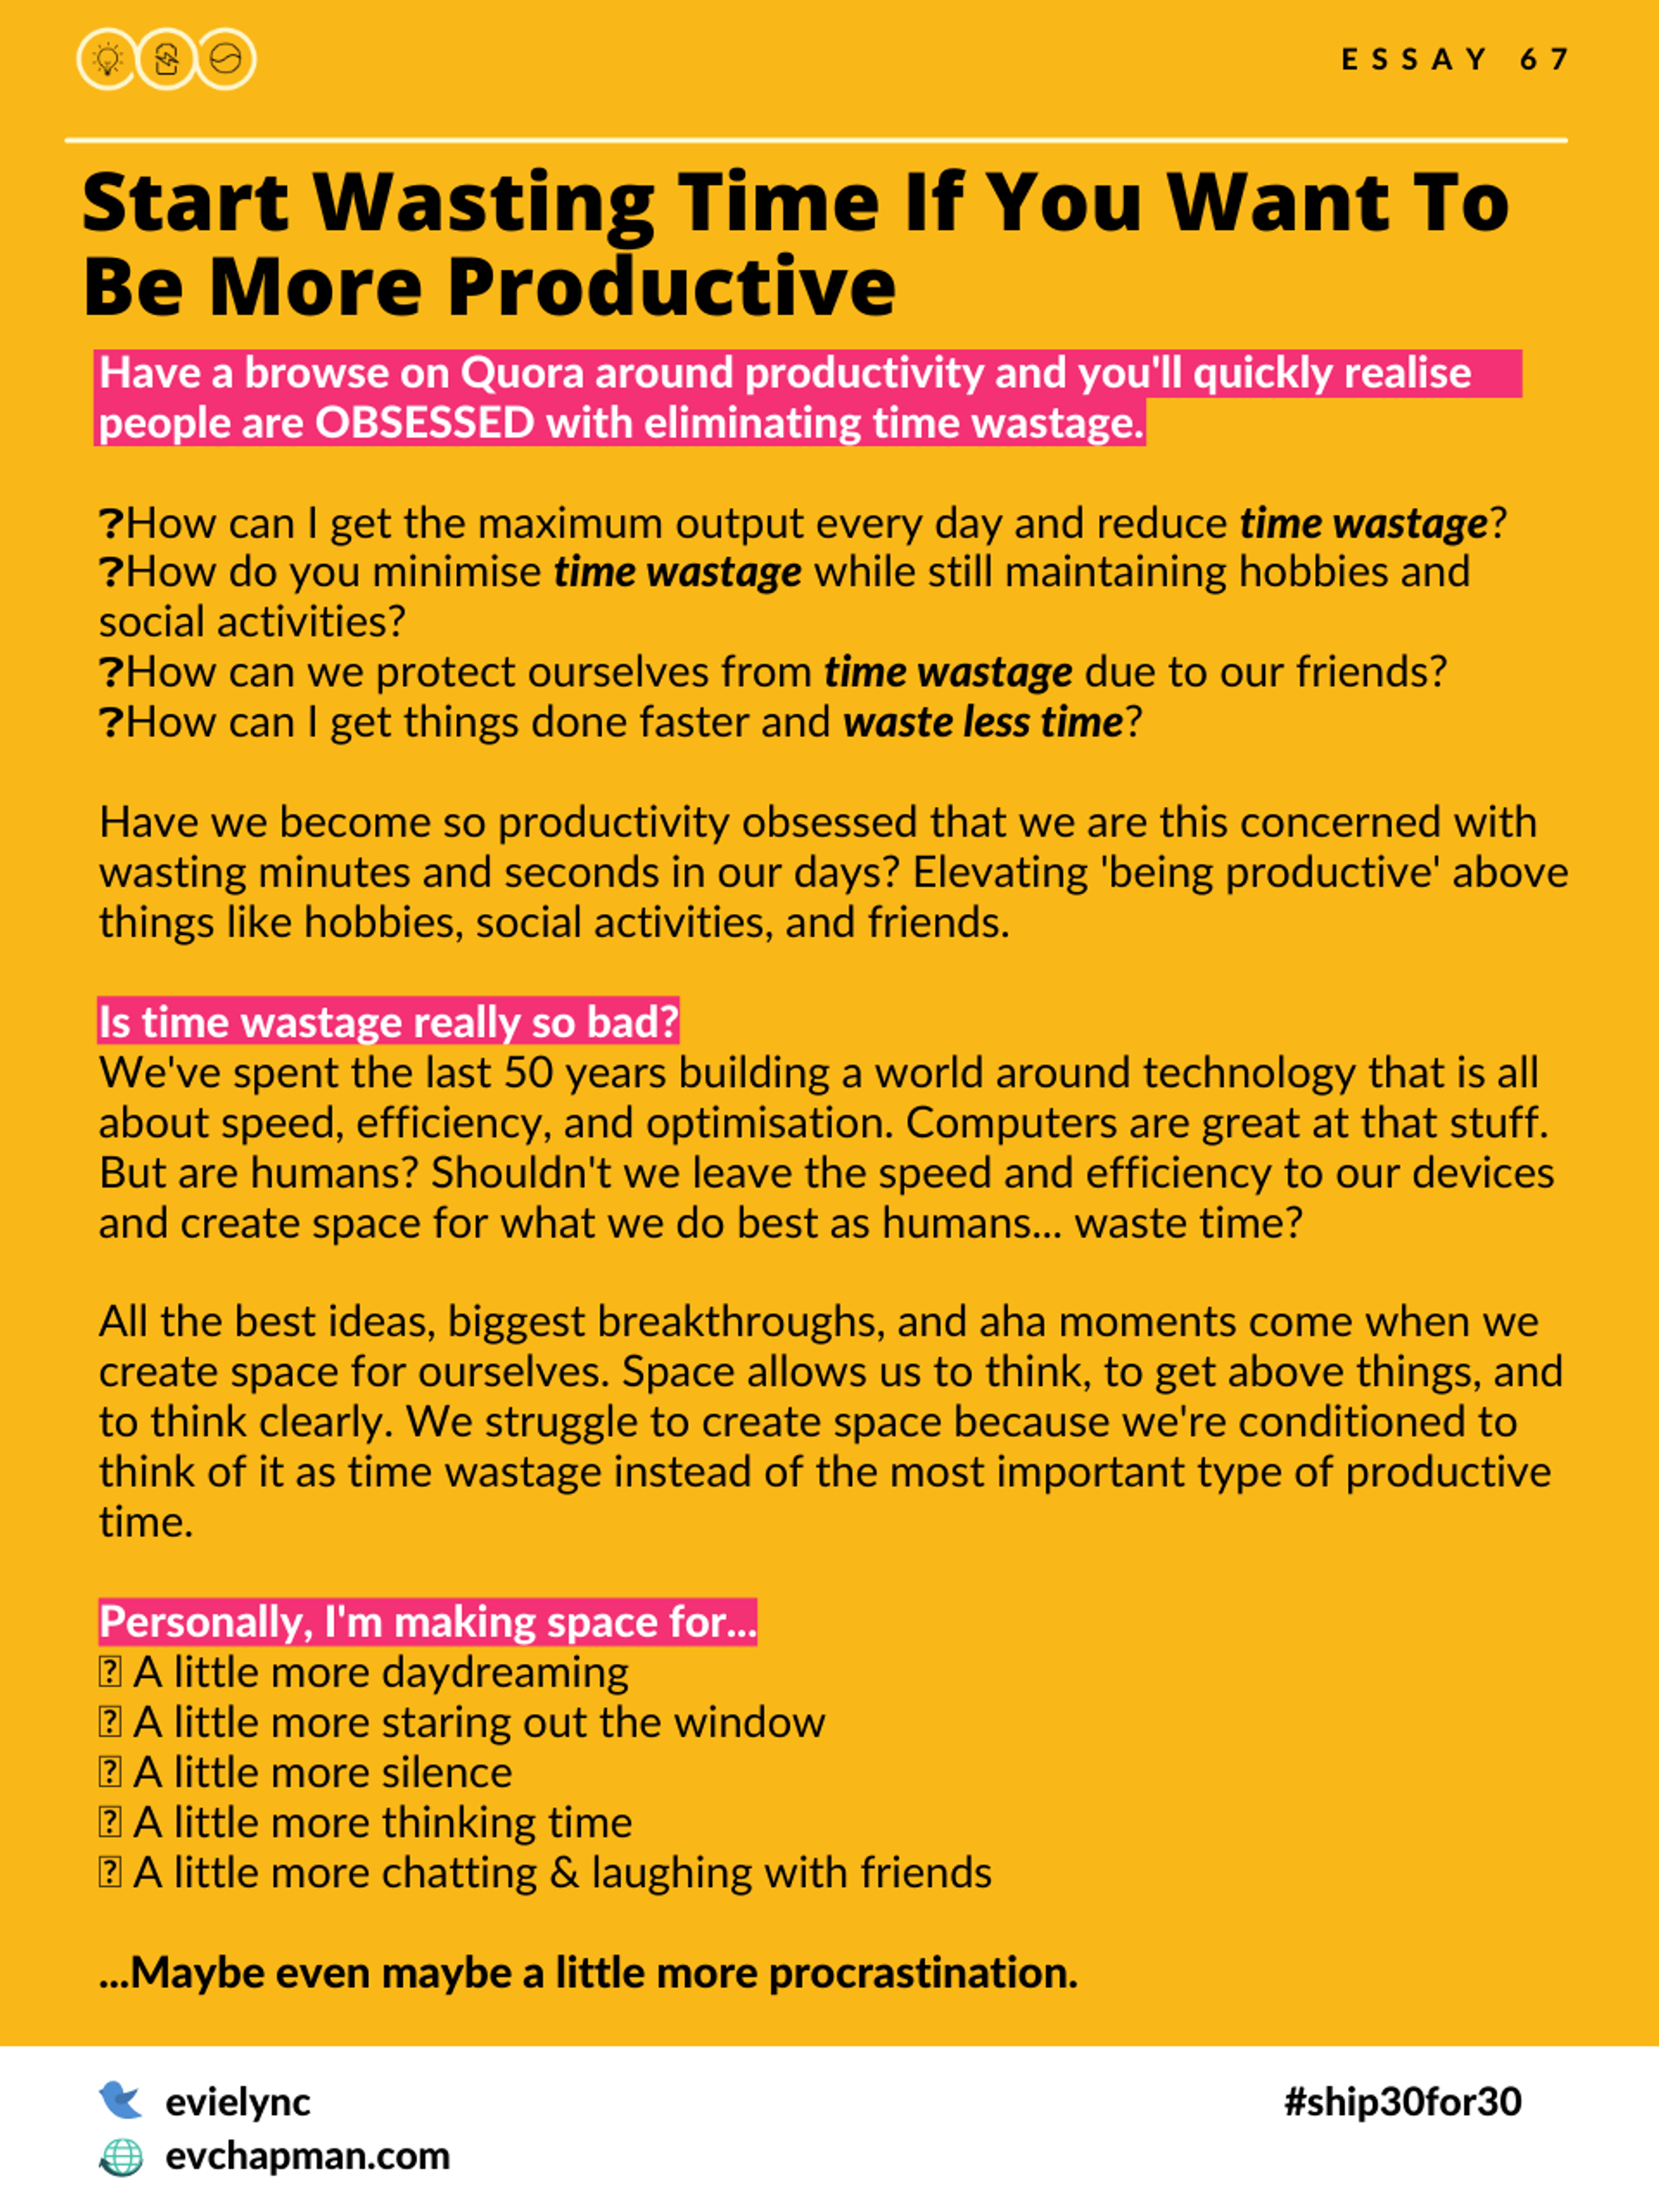 Start Wasting Time If You Want To Be More Productive